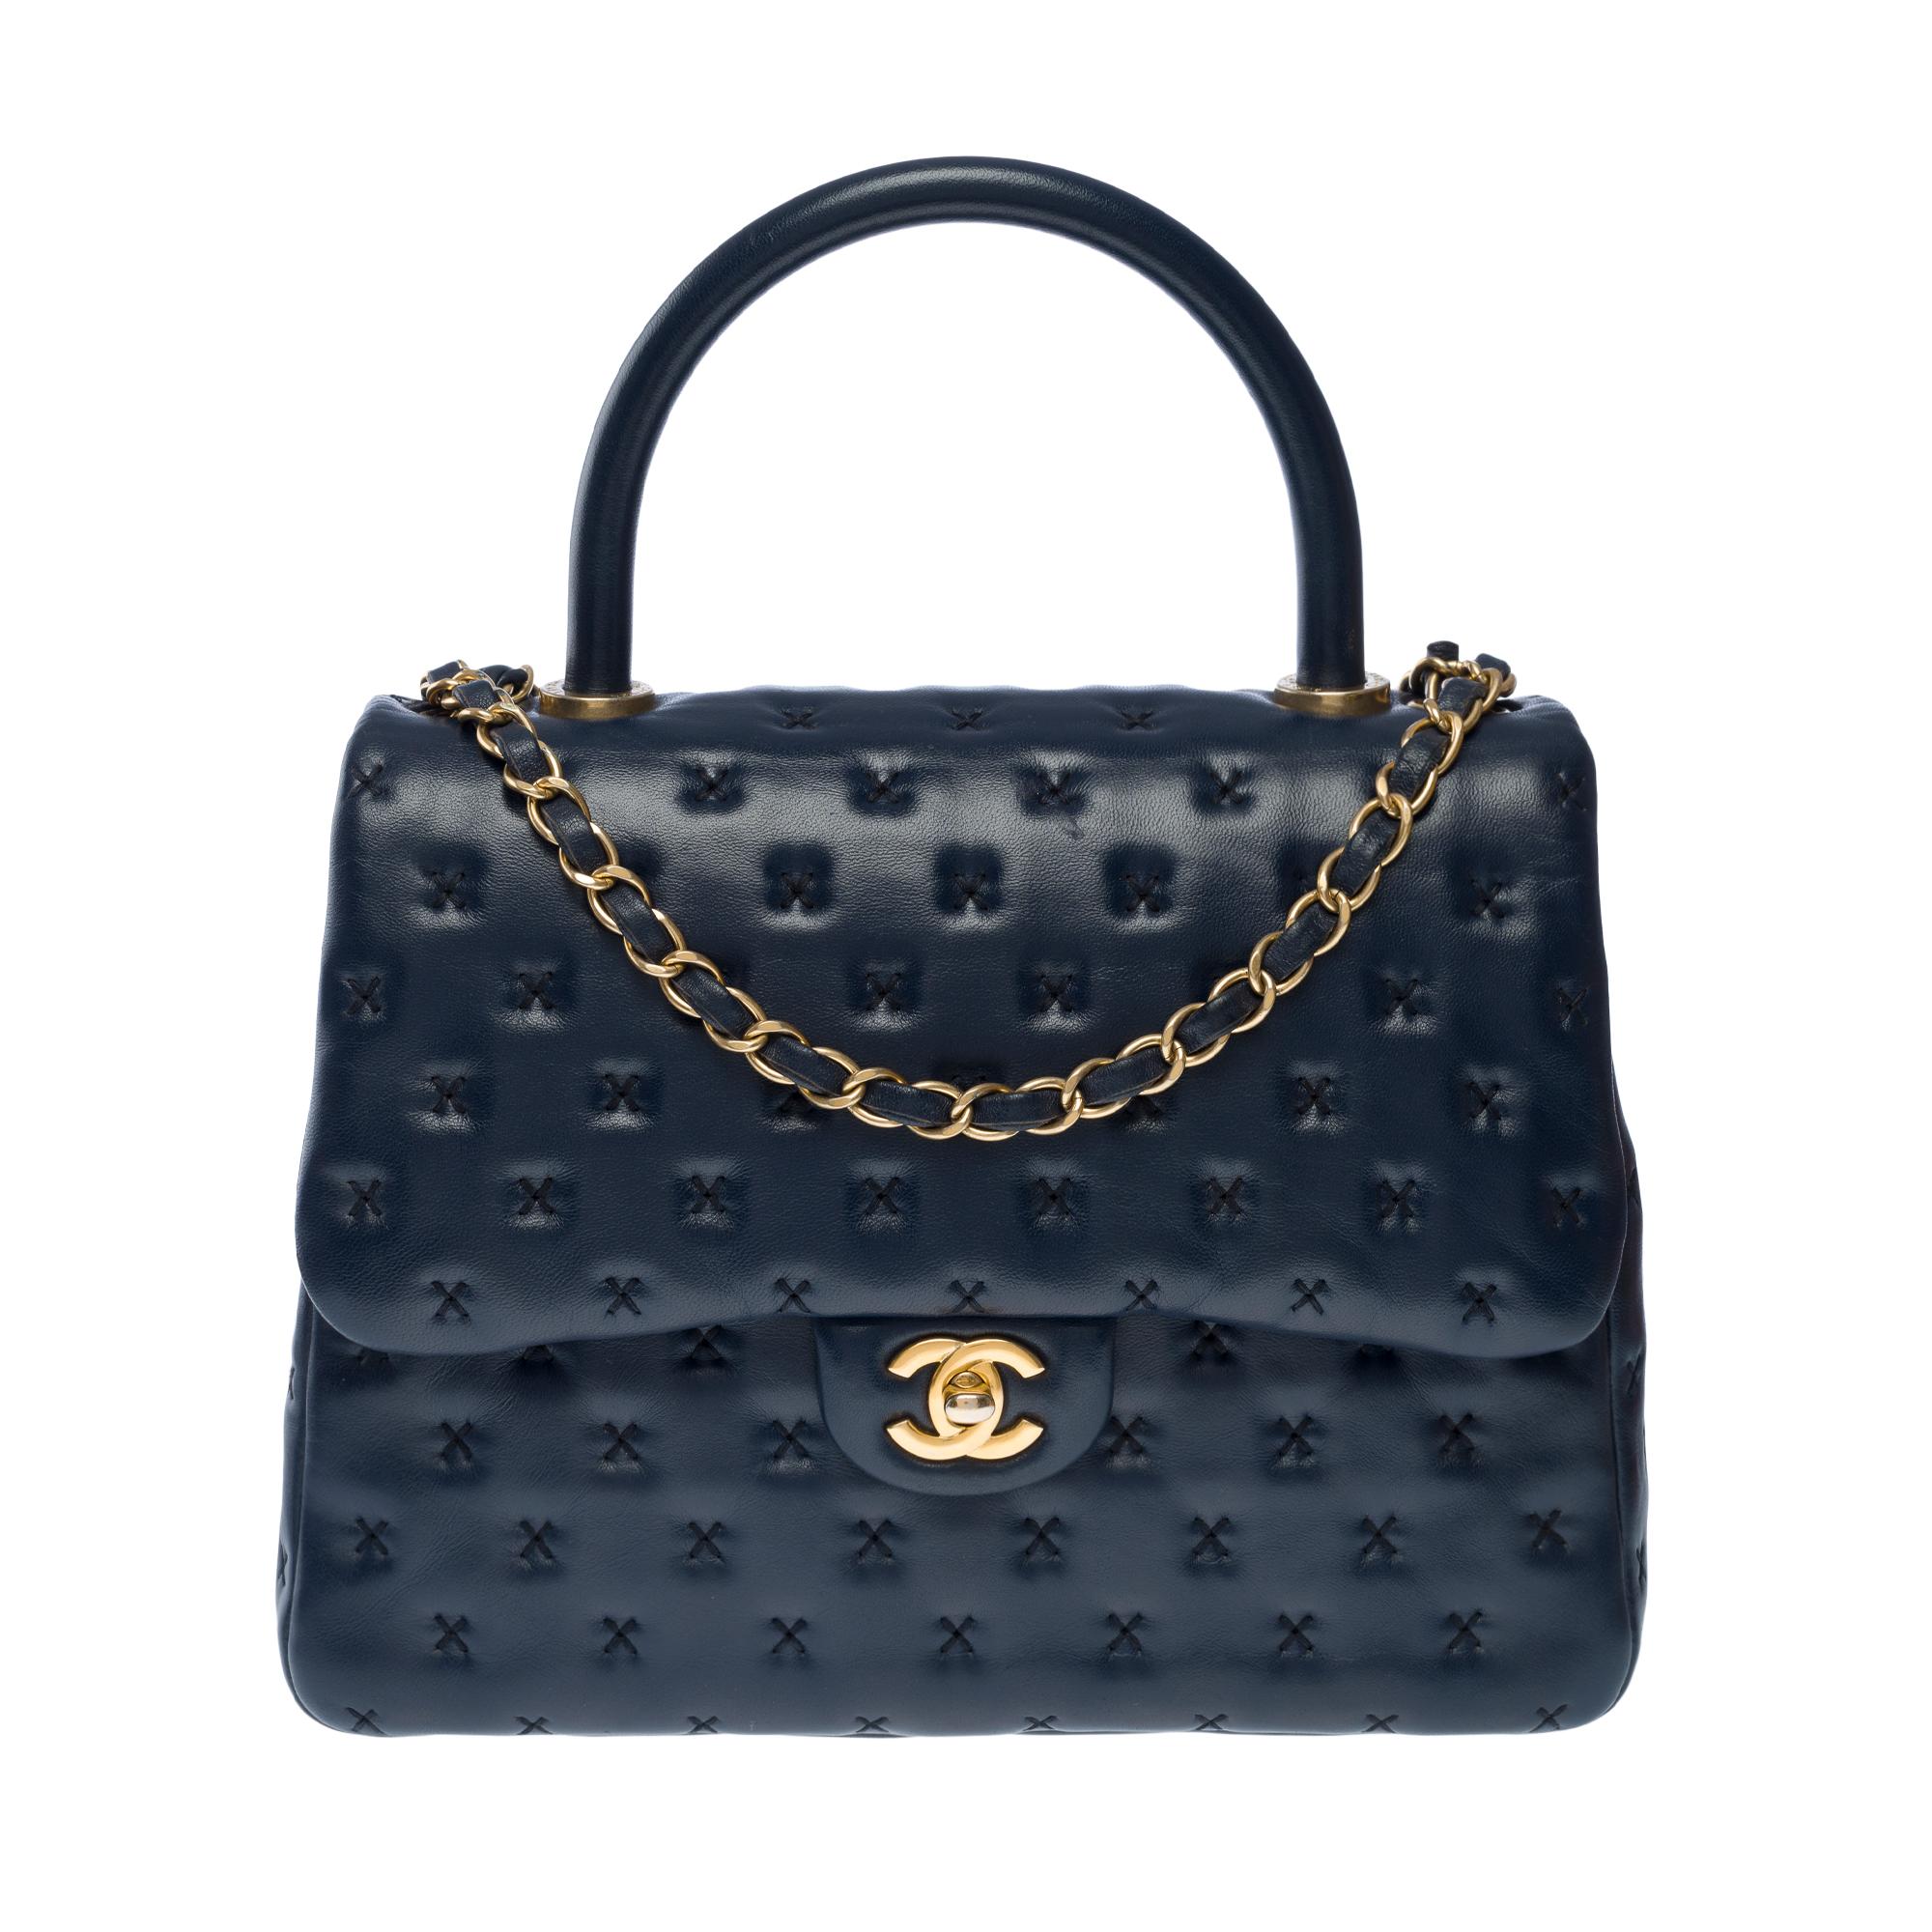 COLLECTOR BAG FROM THE PARIS-ROME COLLECTION/ FW 2016

Rare Chanel Coco handle flap bag from the Paris-Rome collection in navy blue lambskin leather with navy cross stitching, brushed matte gold metal hardware, a brushed matte gold metal chain